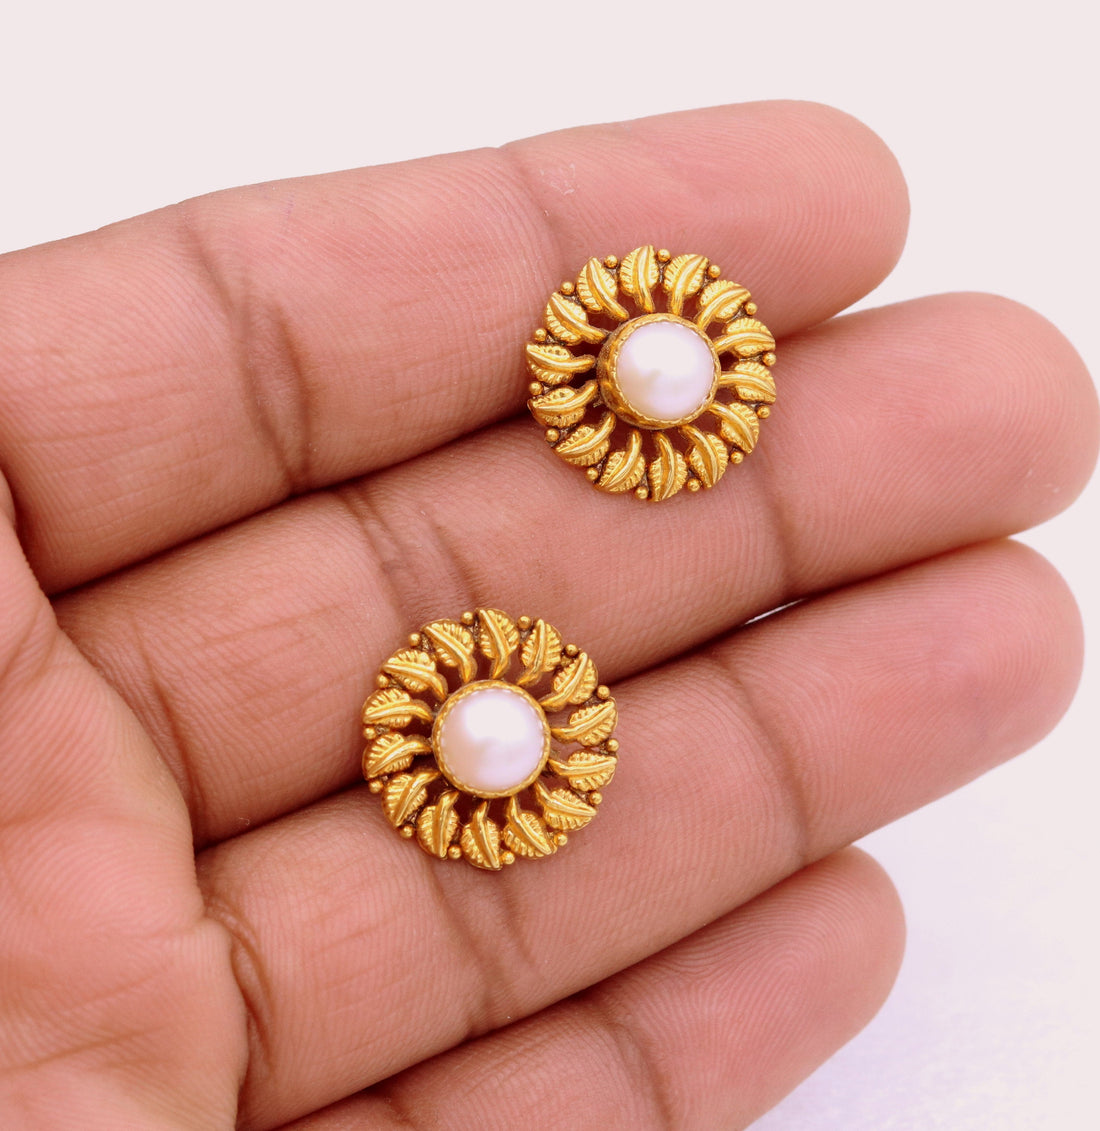 Vintage antique design certified 22kt yellow gold flower shape leaf design handmade stud earring gorgeous tribal jewelry india - TRIBAL ORNAMENTS